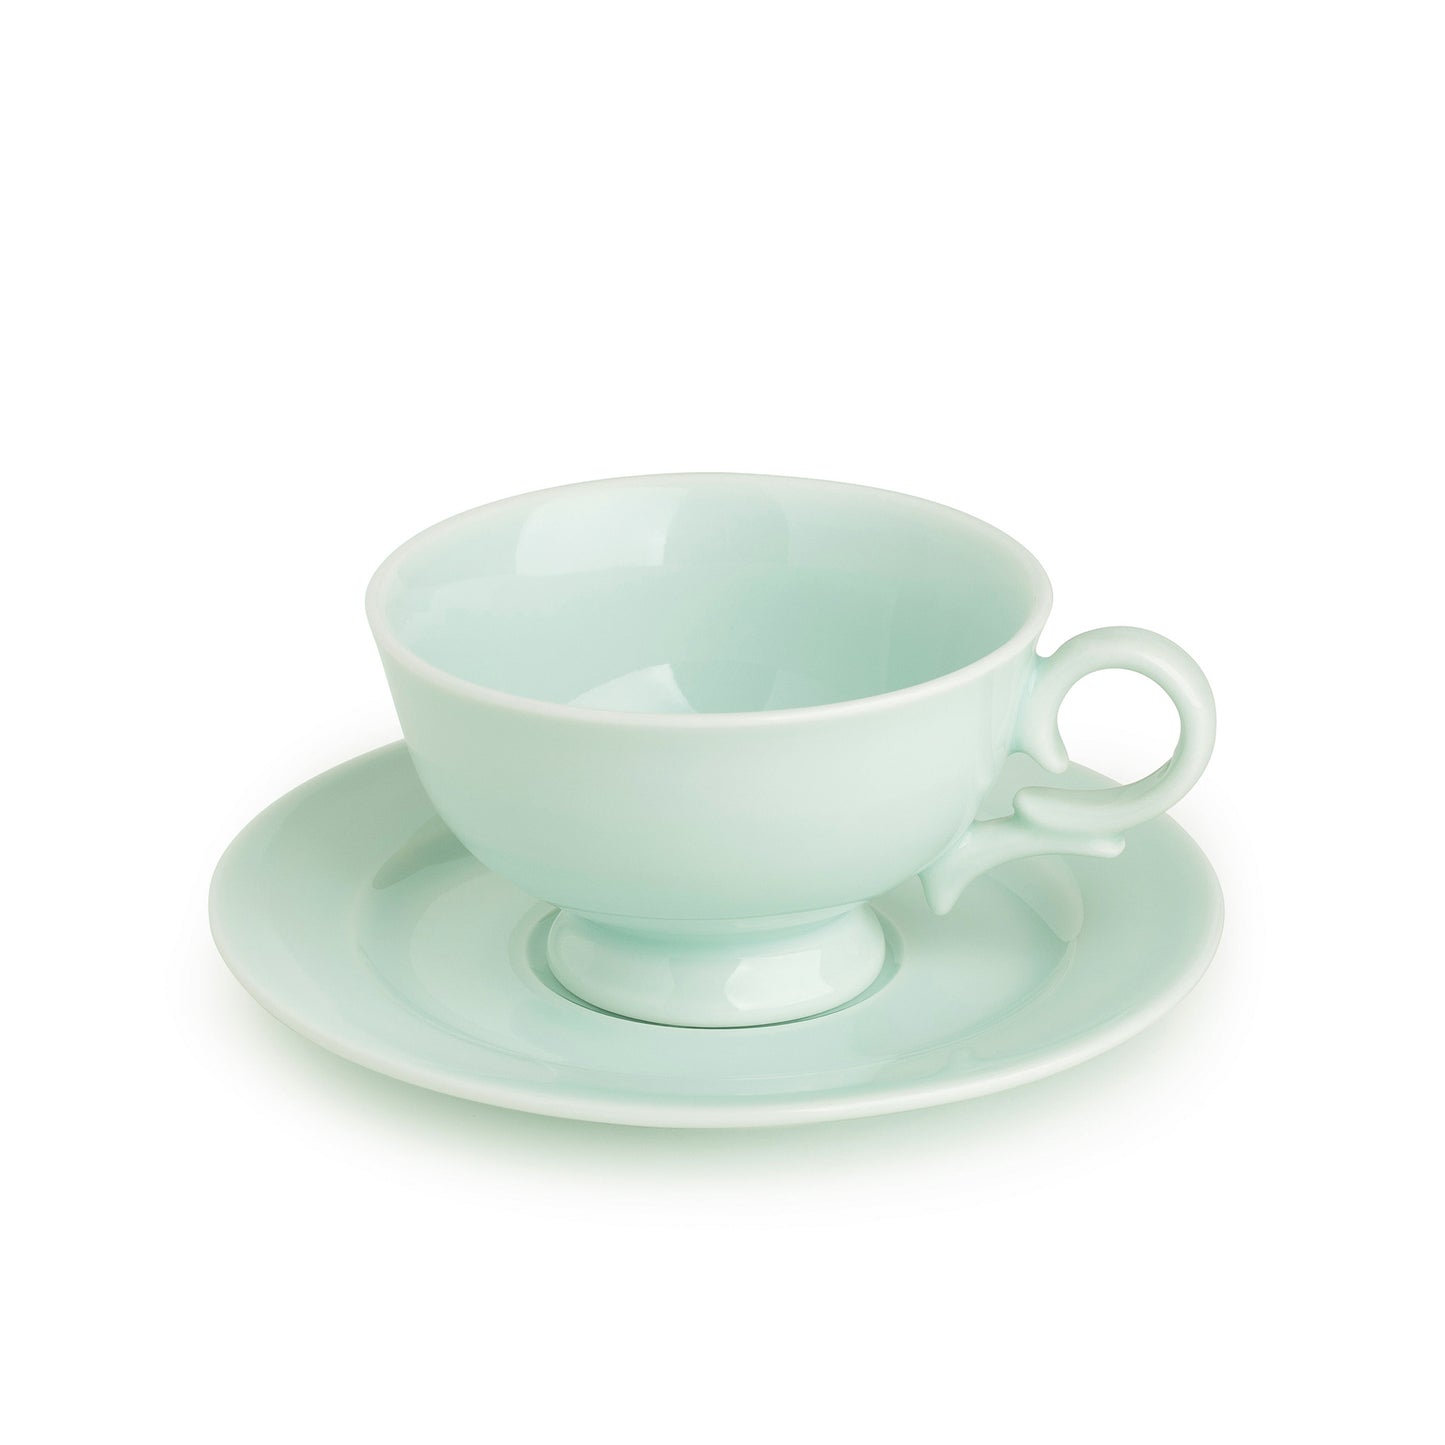 Green celadon porcelain coffee cup and saucer set, 30 degree angle view, media 1 of 4